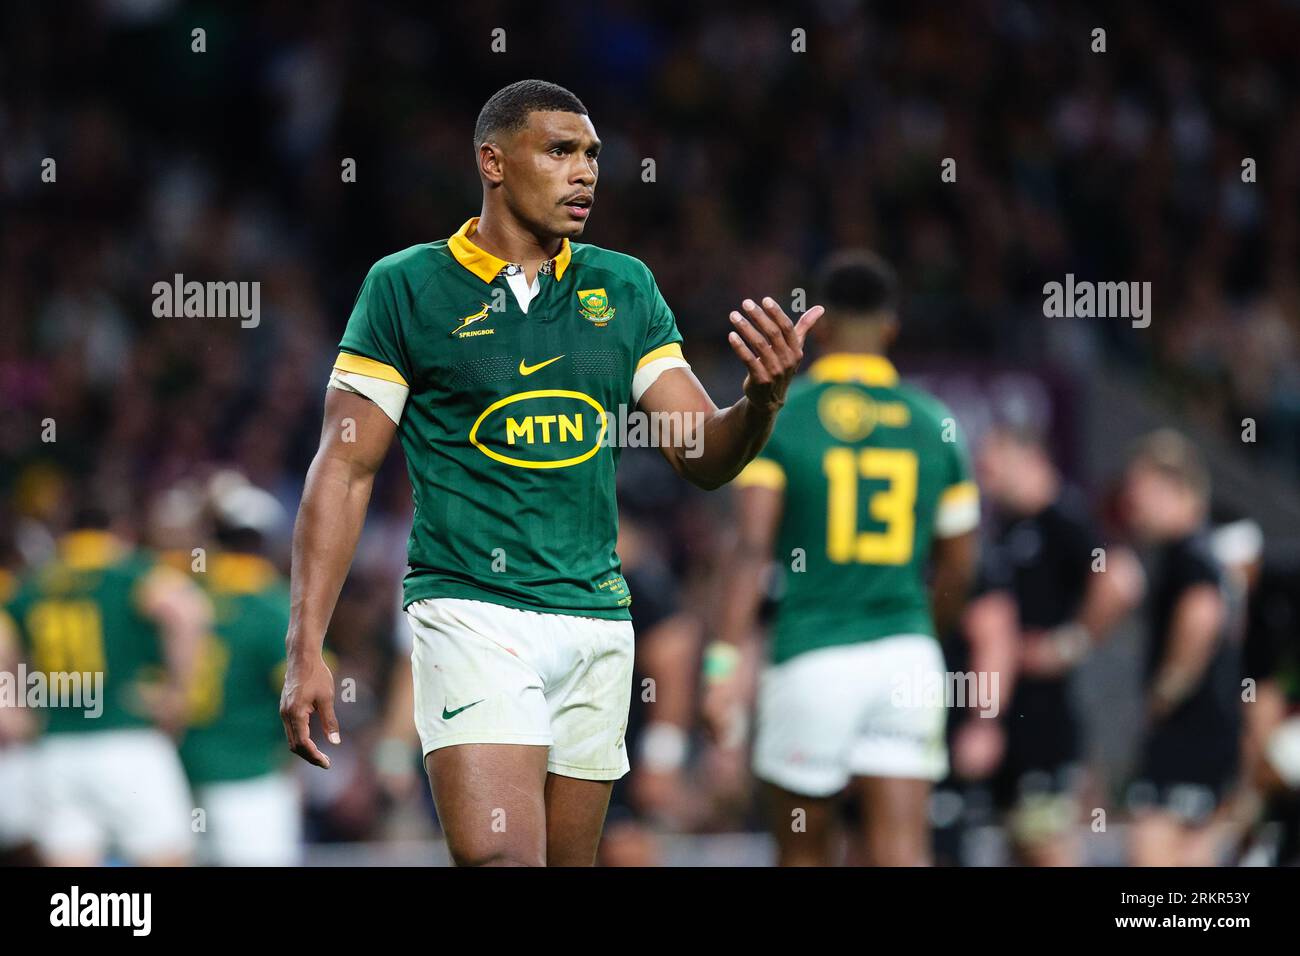 LONDON, UK - 25th Aug 2023:  Damian Willemse of South Africa during the Qatar Airways Cup International match between the South Africa Springboks and the New Zealand All Blacks at Twickenham Stadium  (Credit: Craig Mercer/ Alamy Live News) Stock Photo